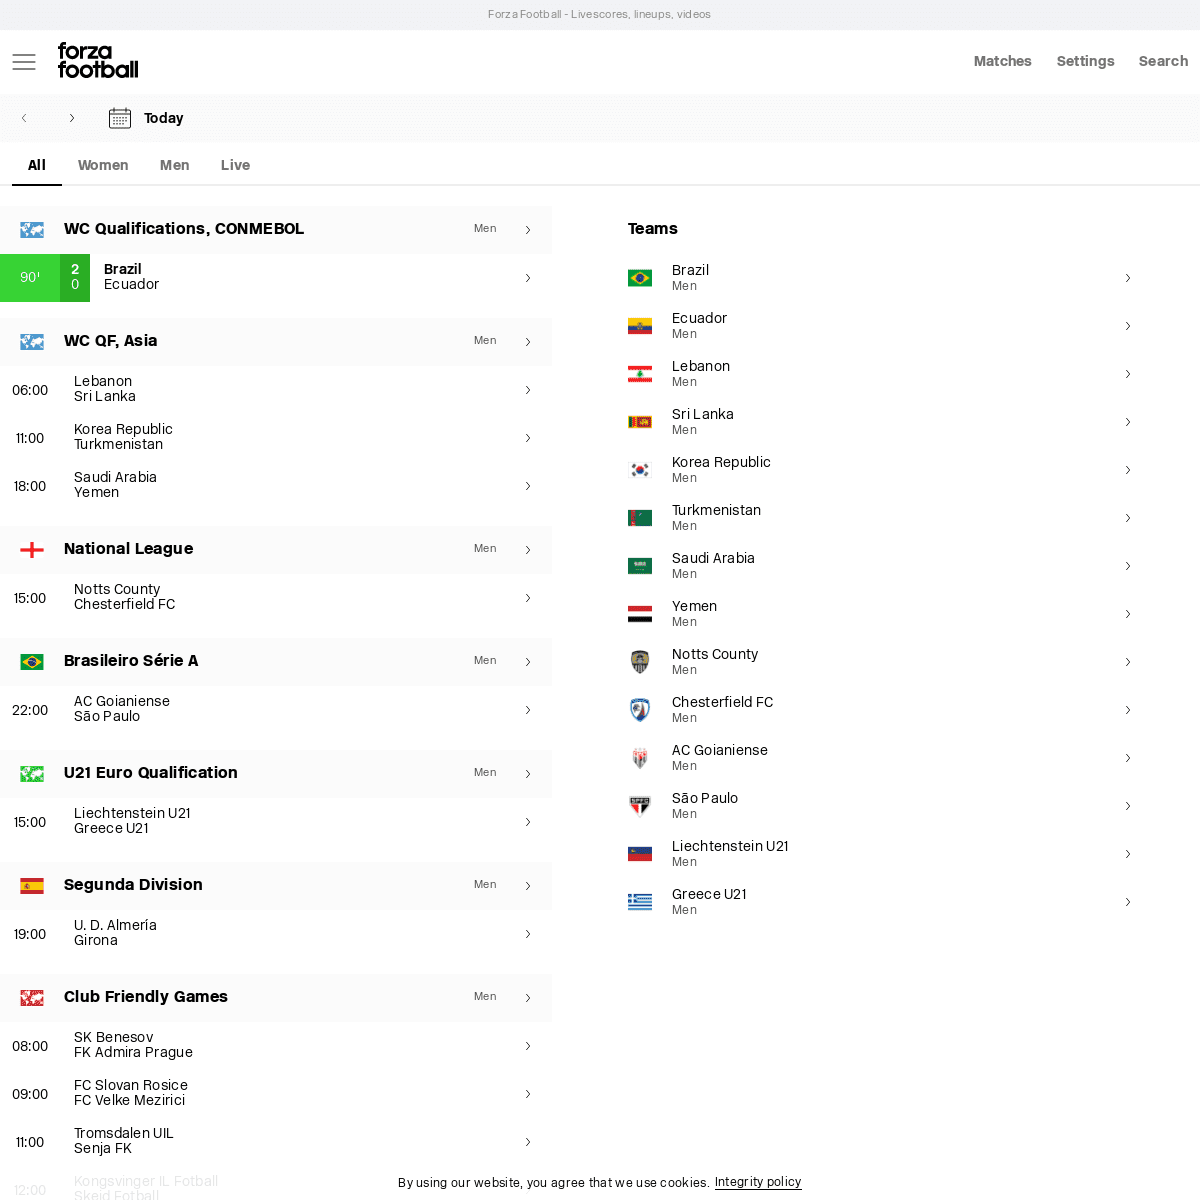 A complete backup of https://forzafootball.com